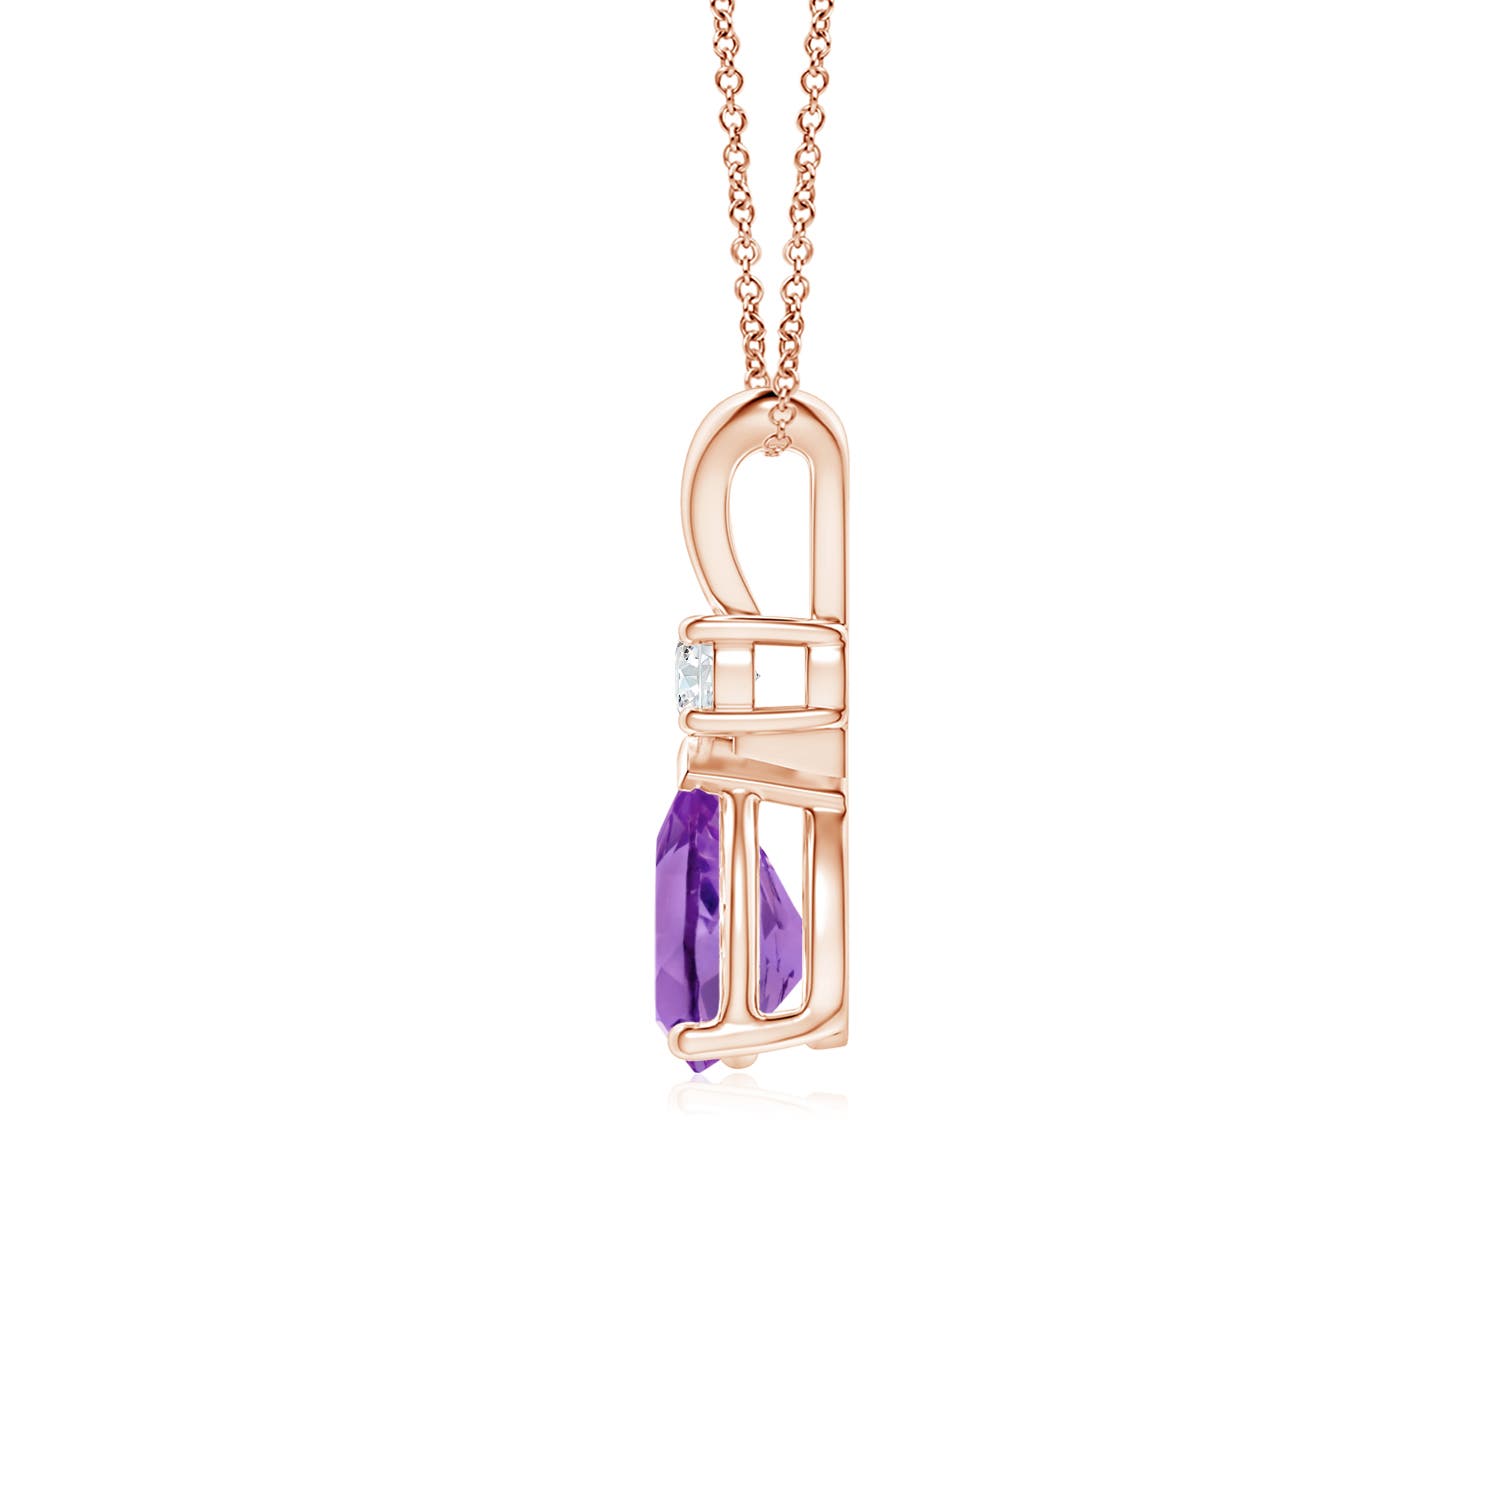 AA - Amethyst / 0.67 CT / 14 KT Rose Gold